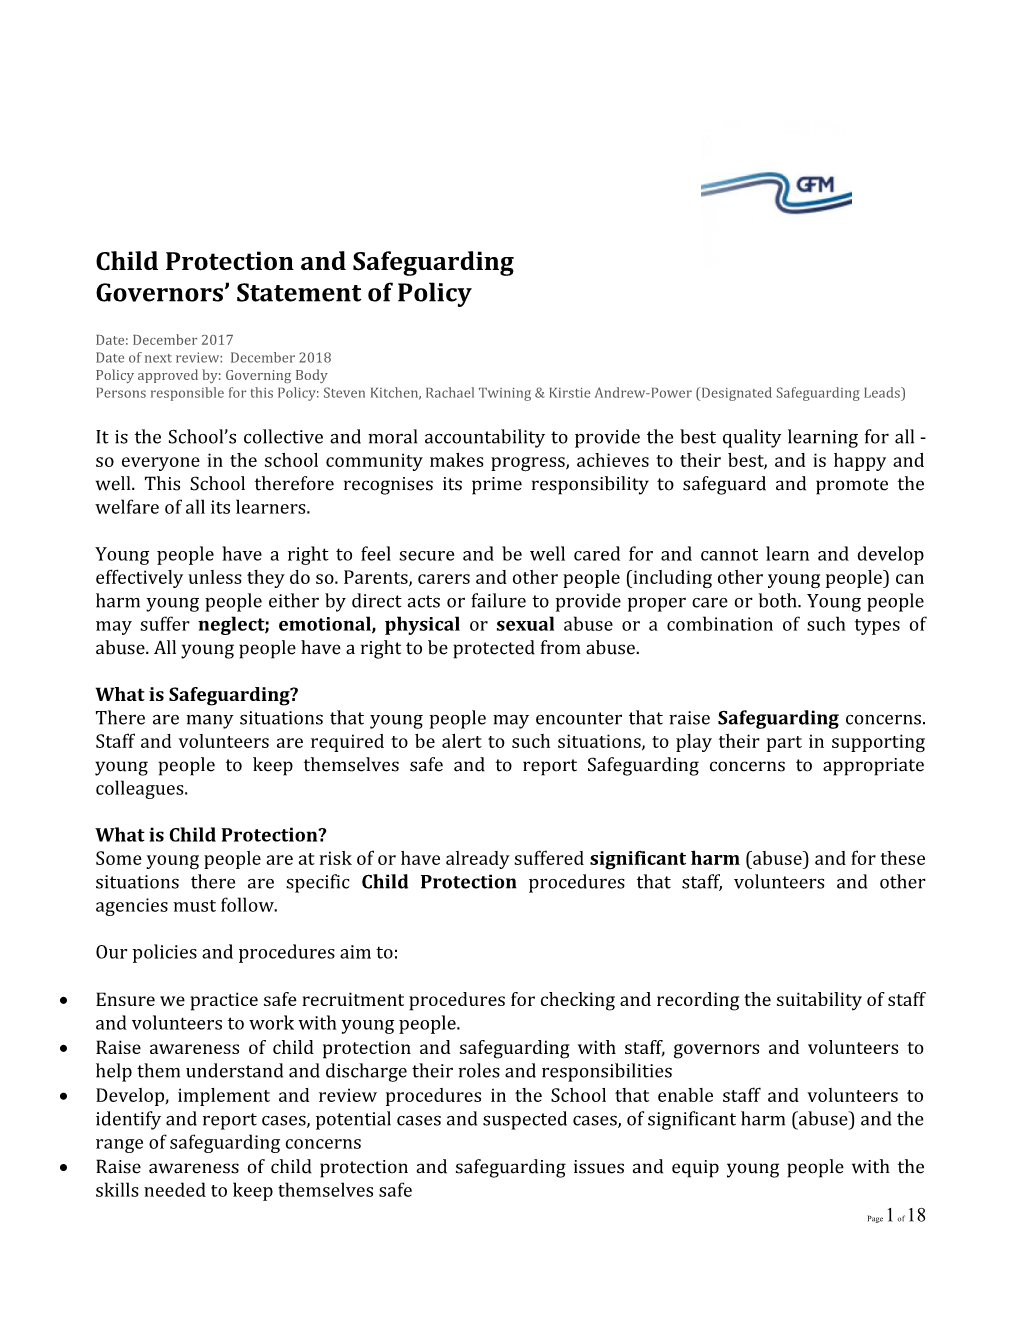 Child Protection Procedures Governors Statement of Policy